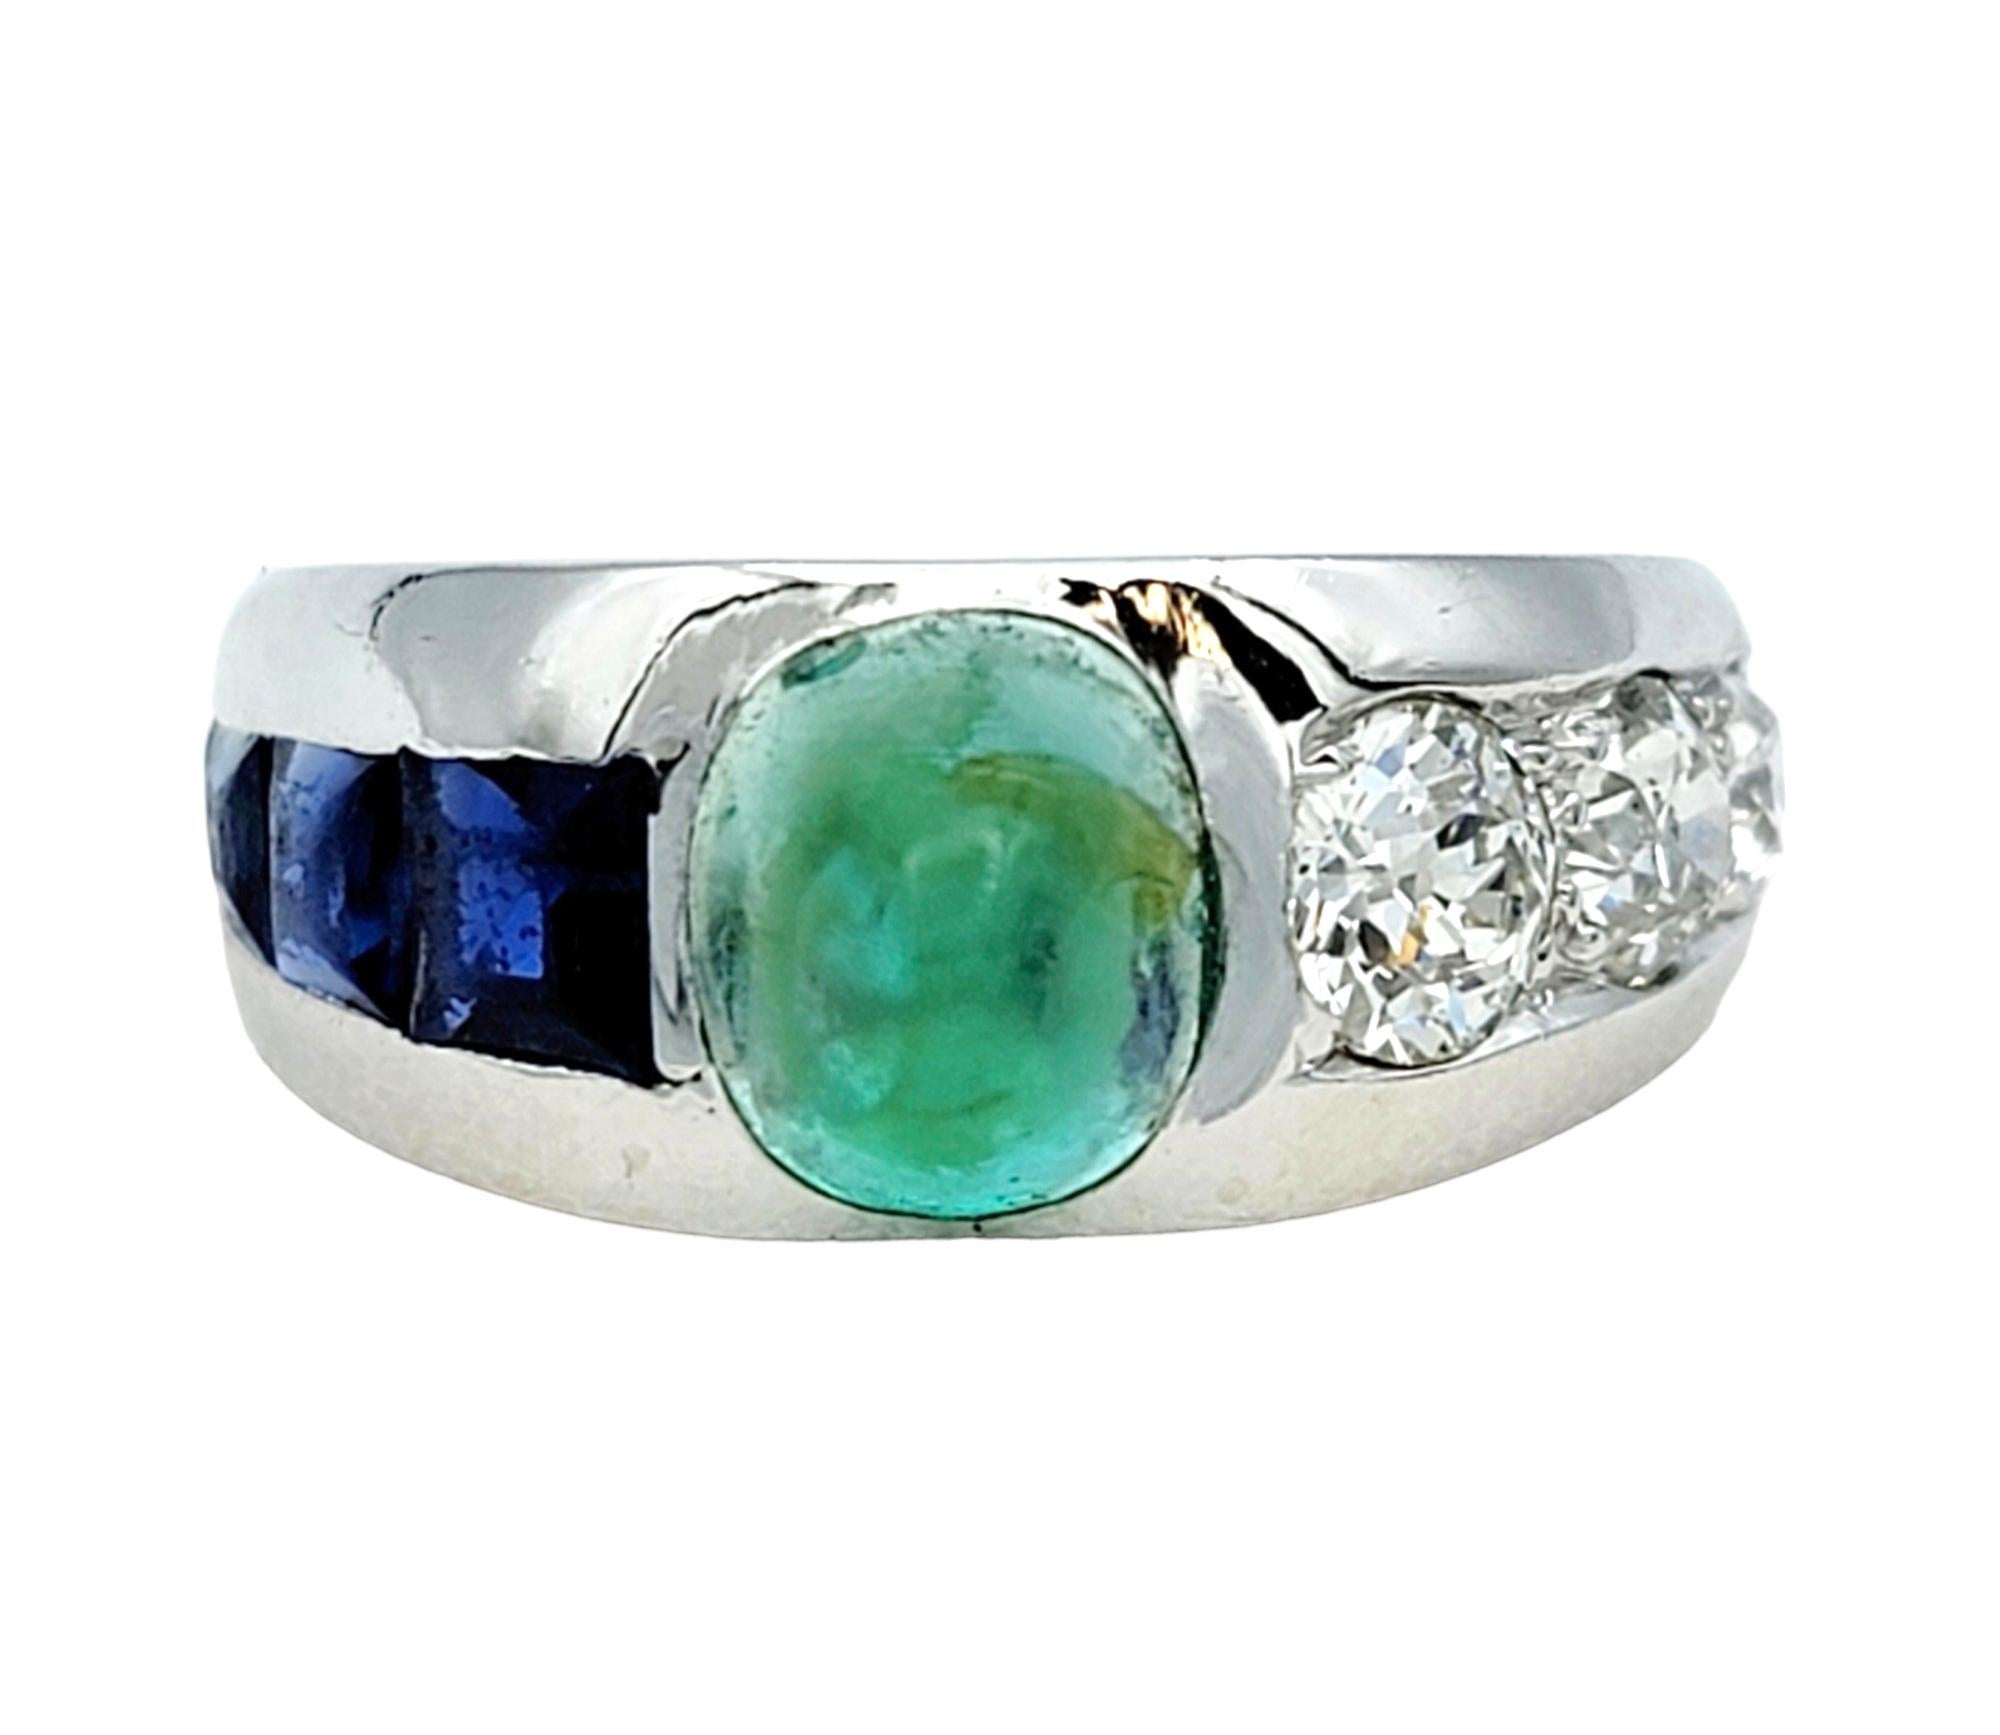 Vintage Cabochon Emerald, Sapphire, and Diamond Band Ring Set in Platinum In Good Condition For Sale In Scottsdale, AZ